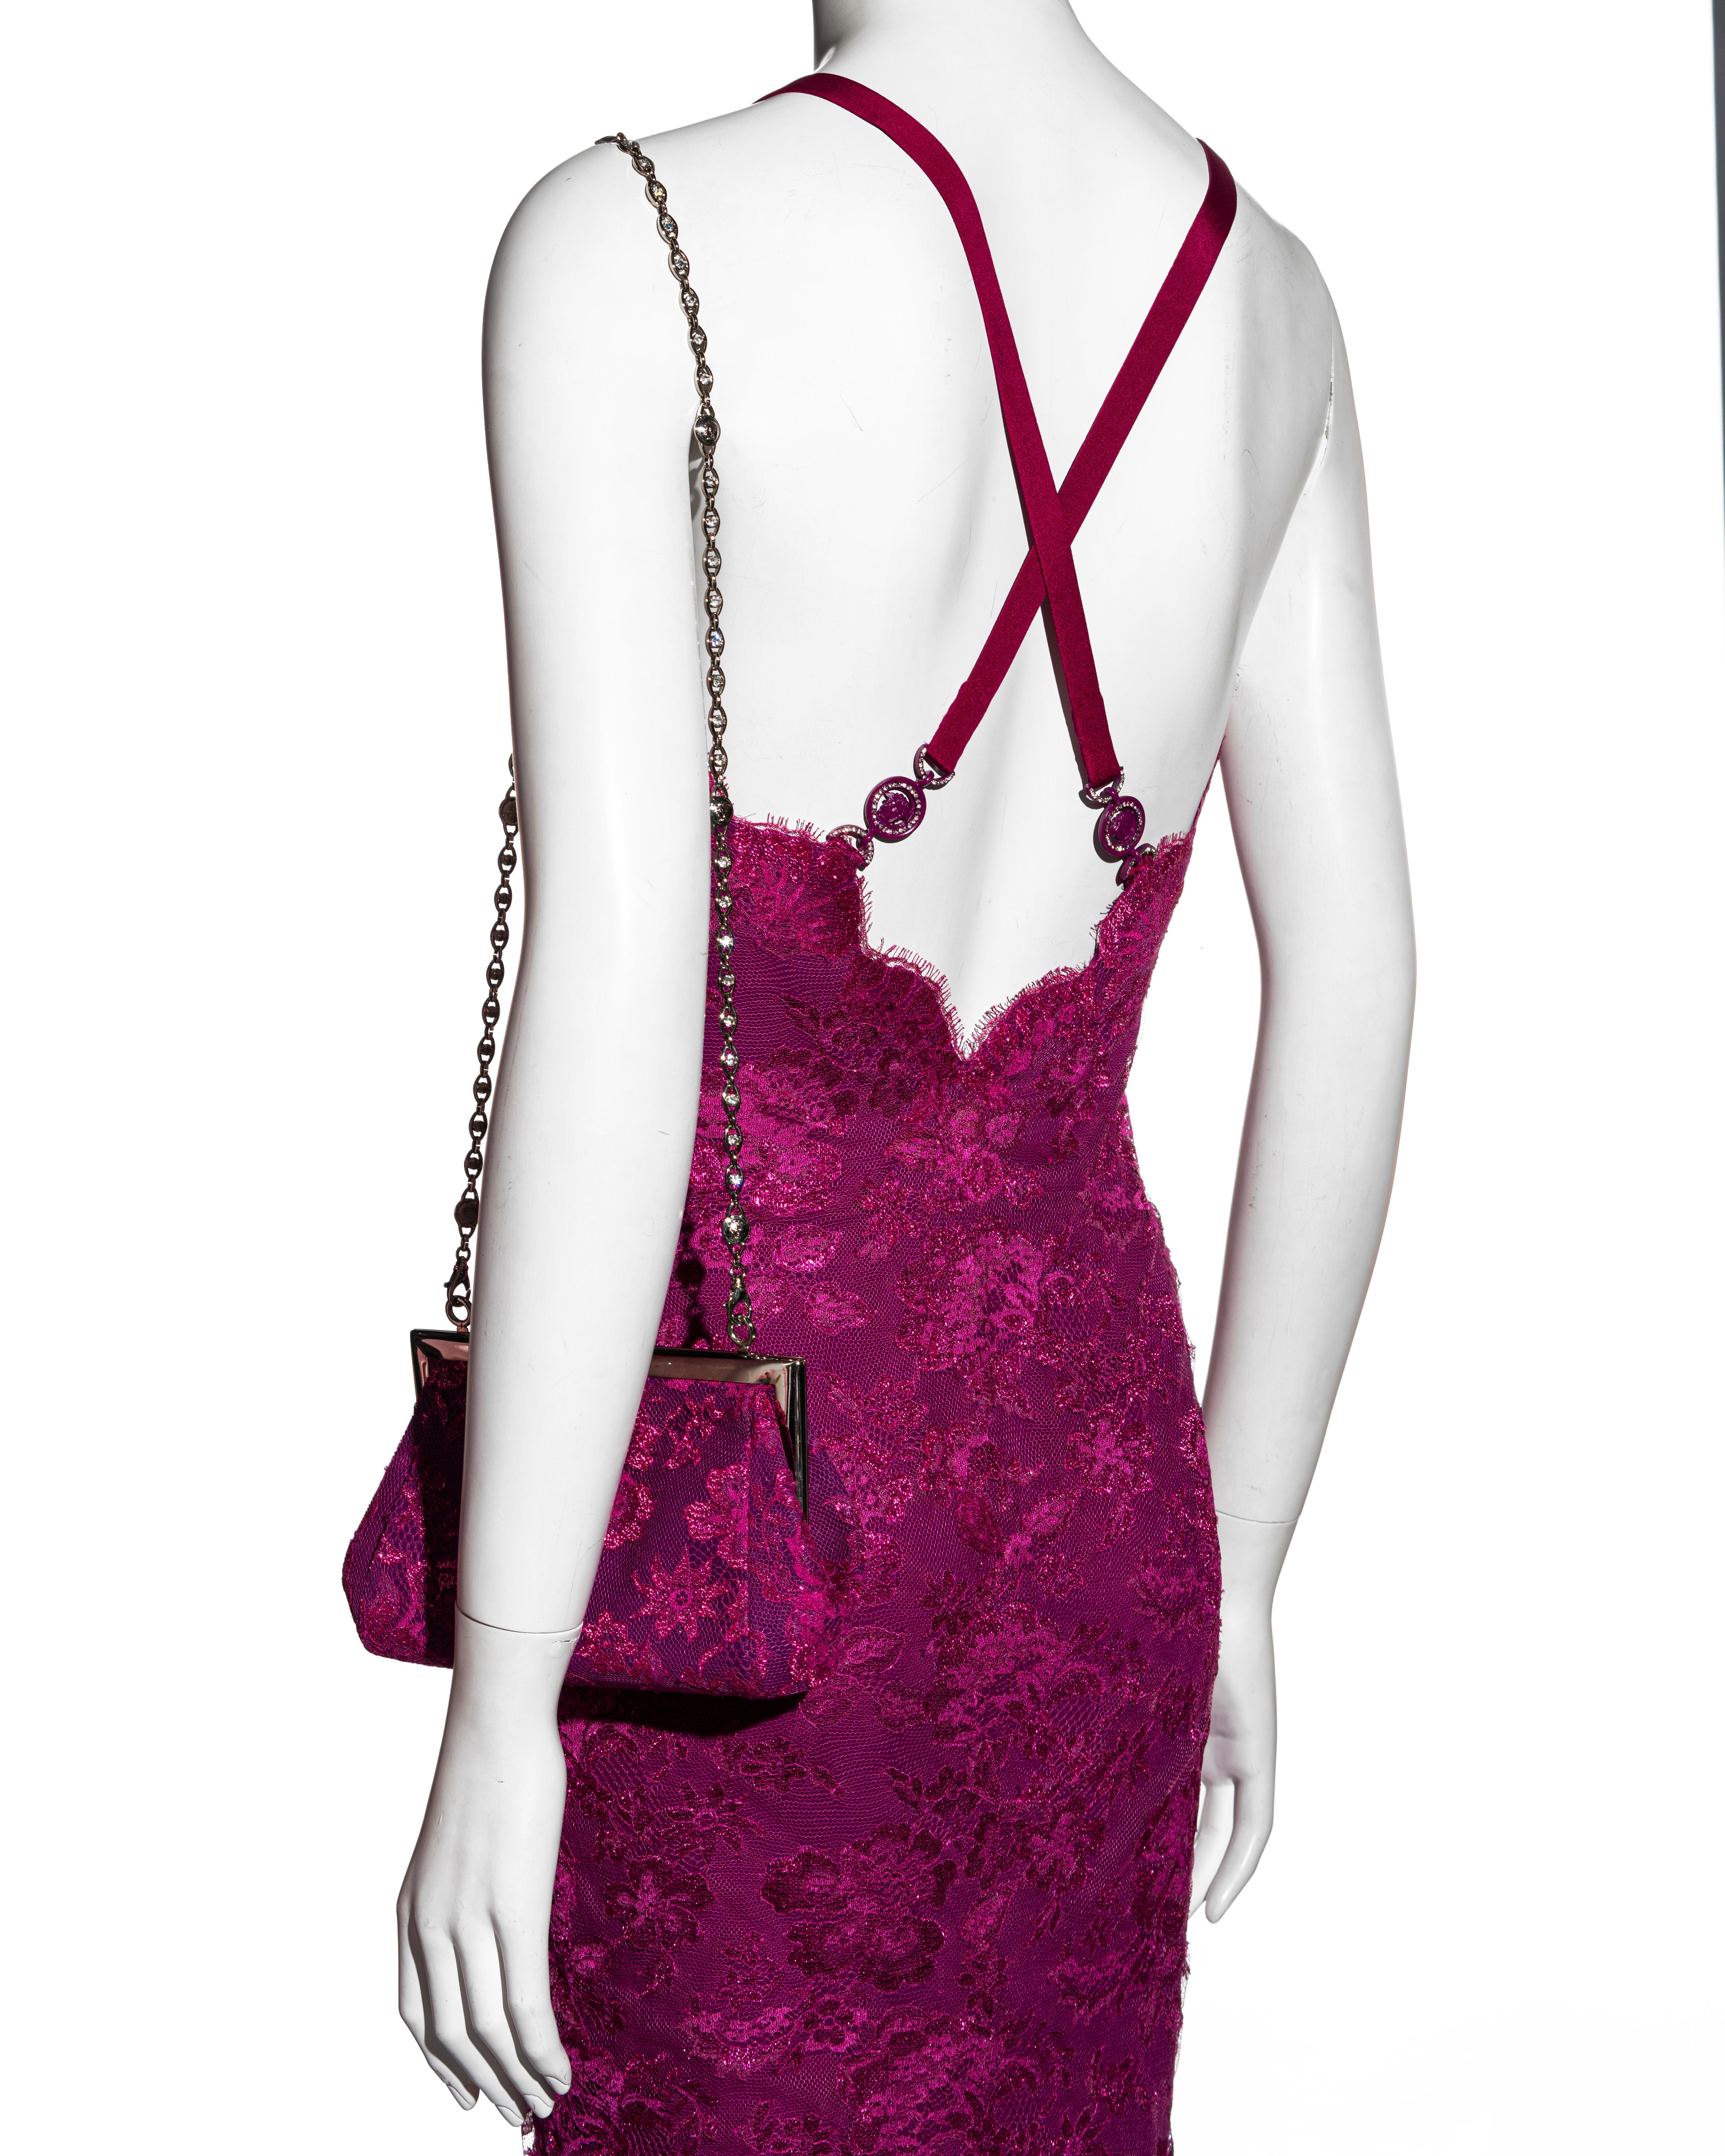 Atelier Versace Haute Couture magenta pink lace evening dress and purse, ss 1996 4